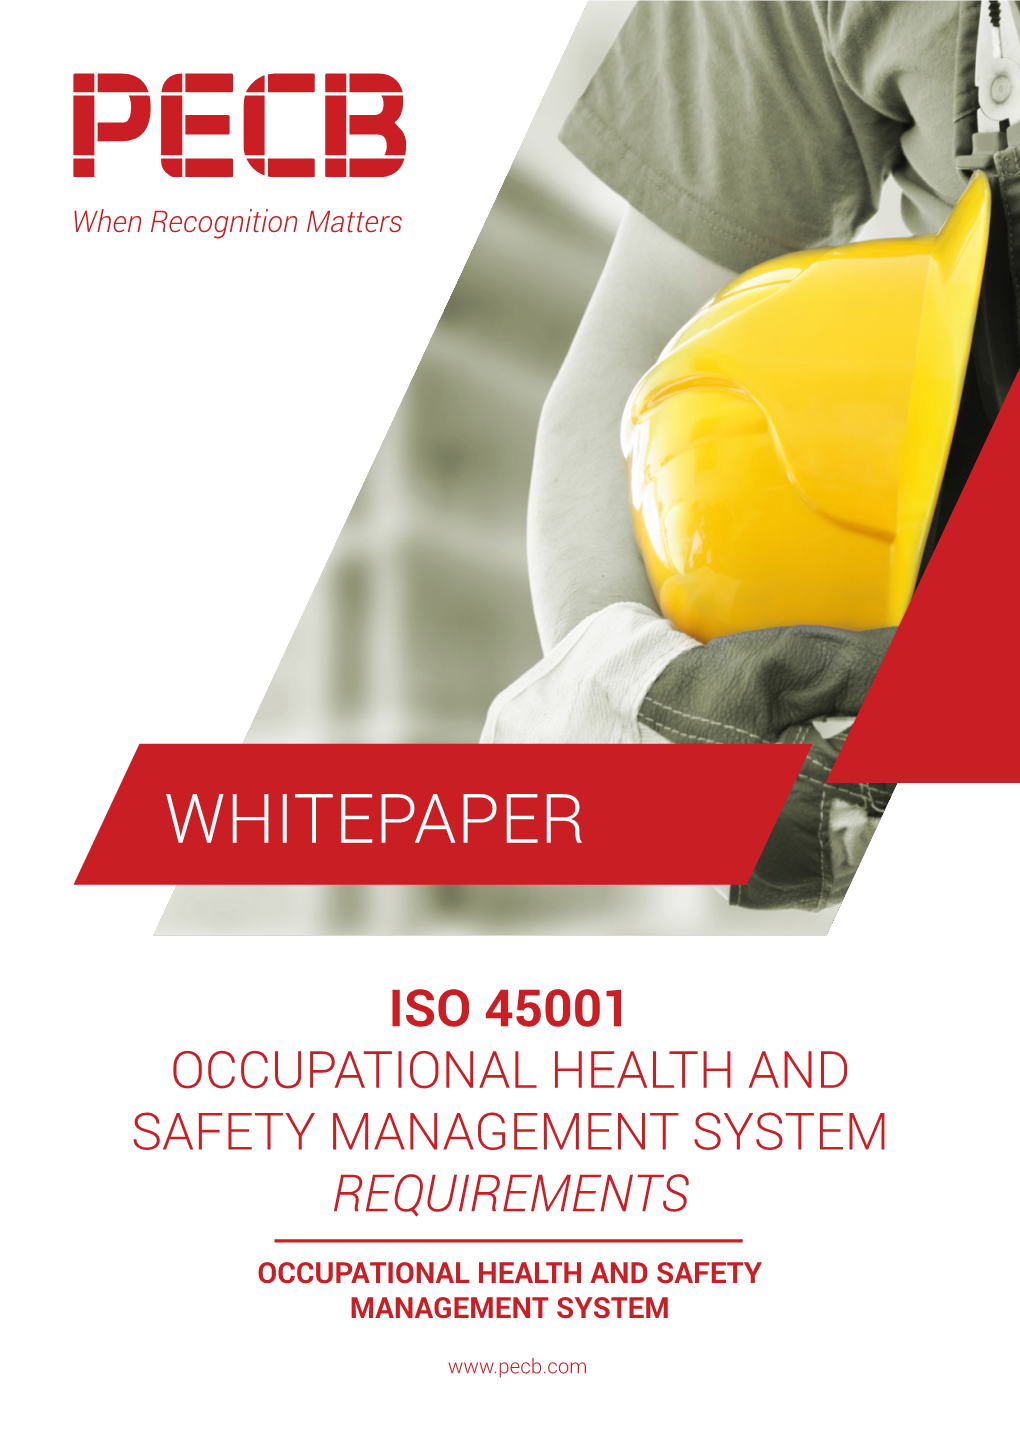 Iso 45001 Occupational Health and Safety Management System Requirements